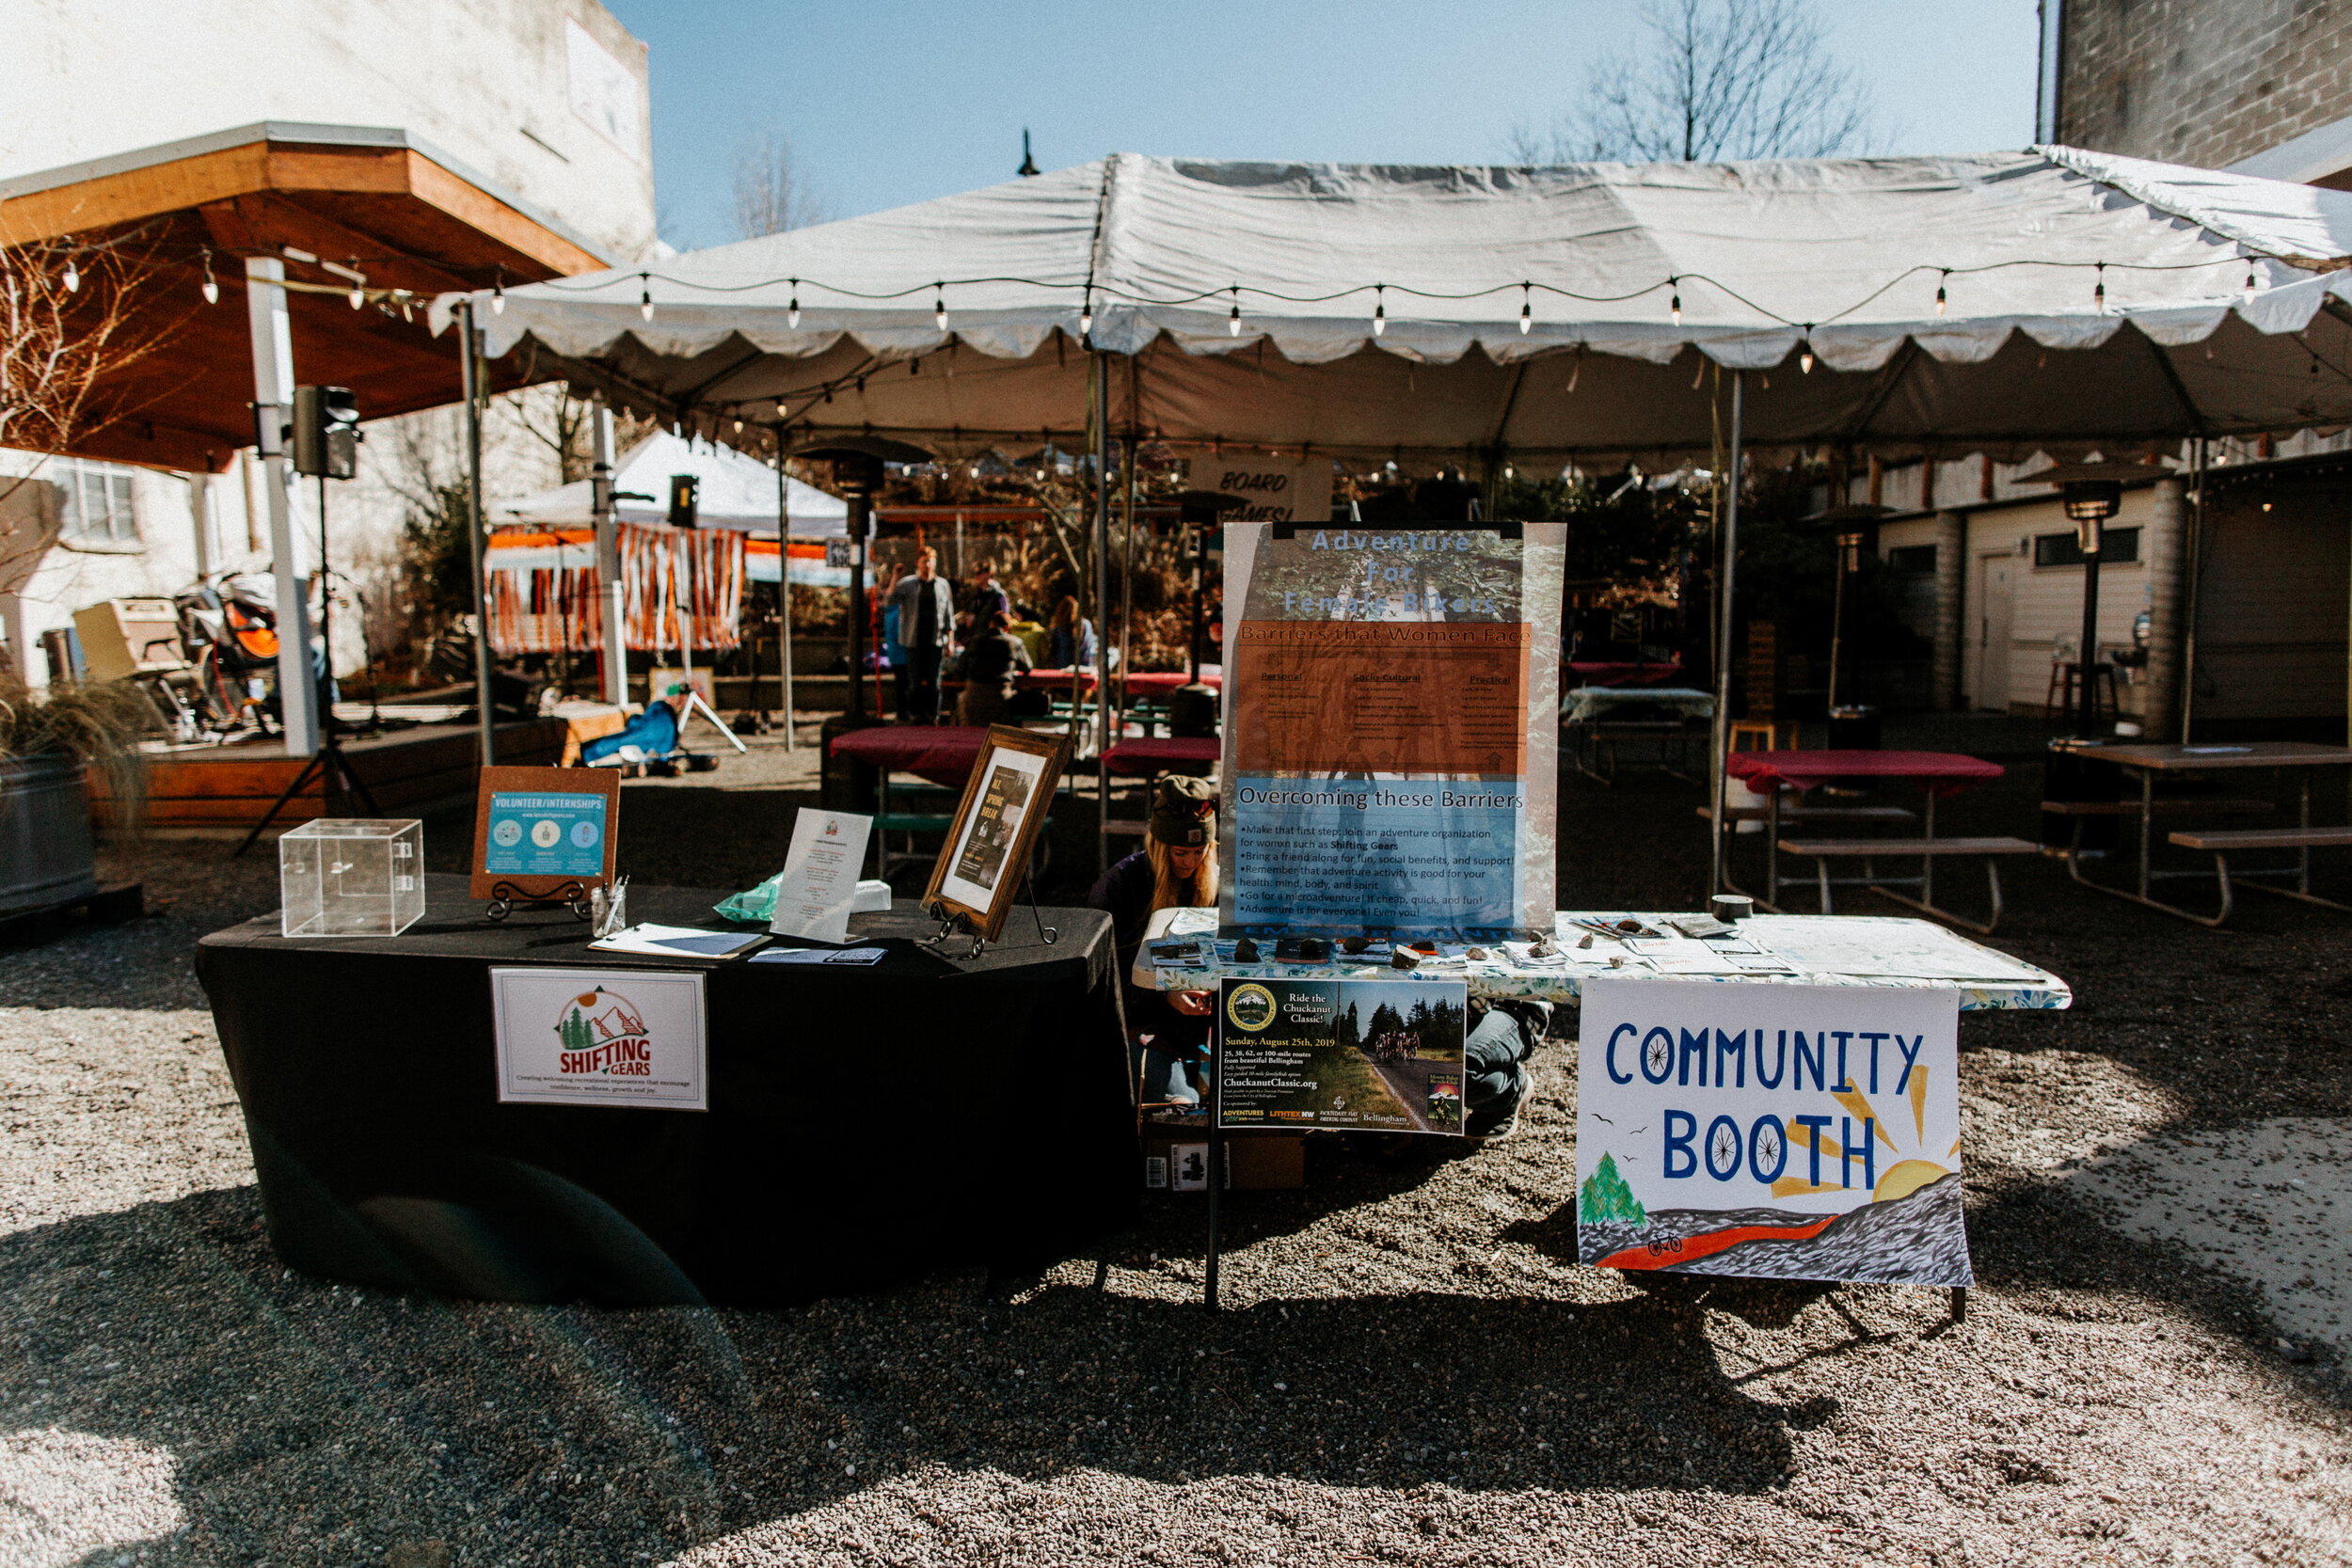 An image of the Community Booth in the Beer Garden at local Nonprofit Shifting Gears’ Bike Swap event